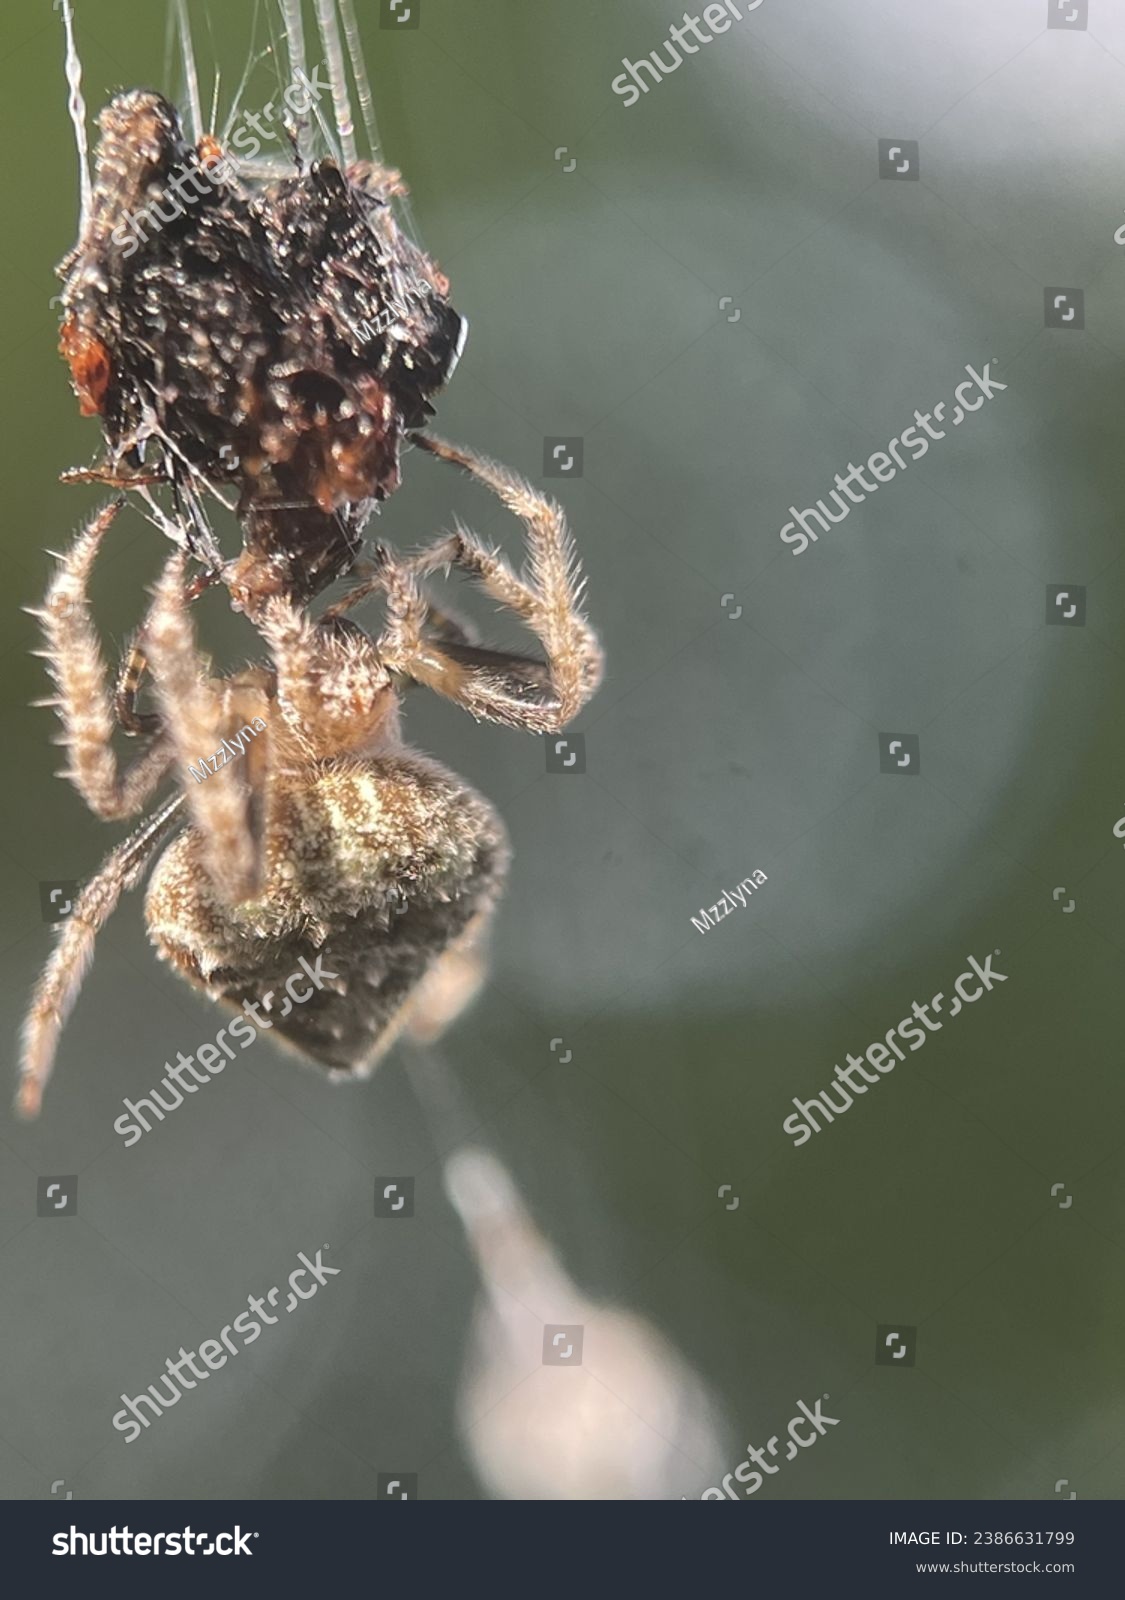 Macro view of a barn spider and commonly known as common orb-weaver spider #2386631799